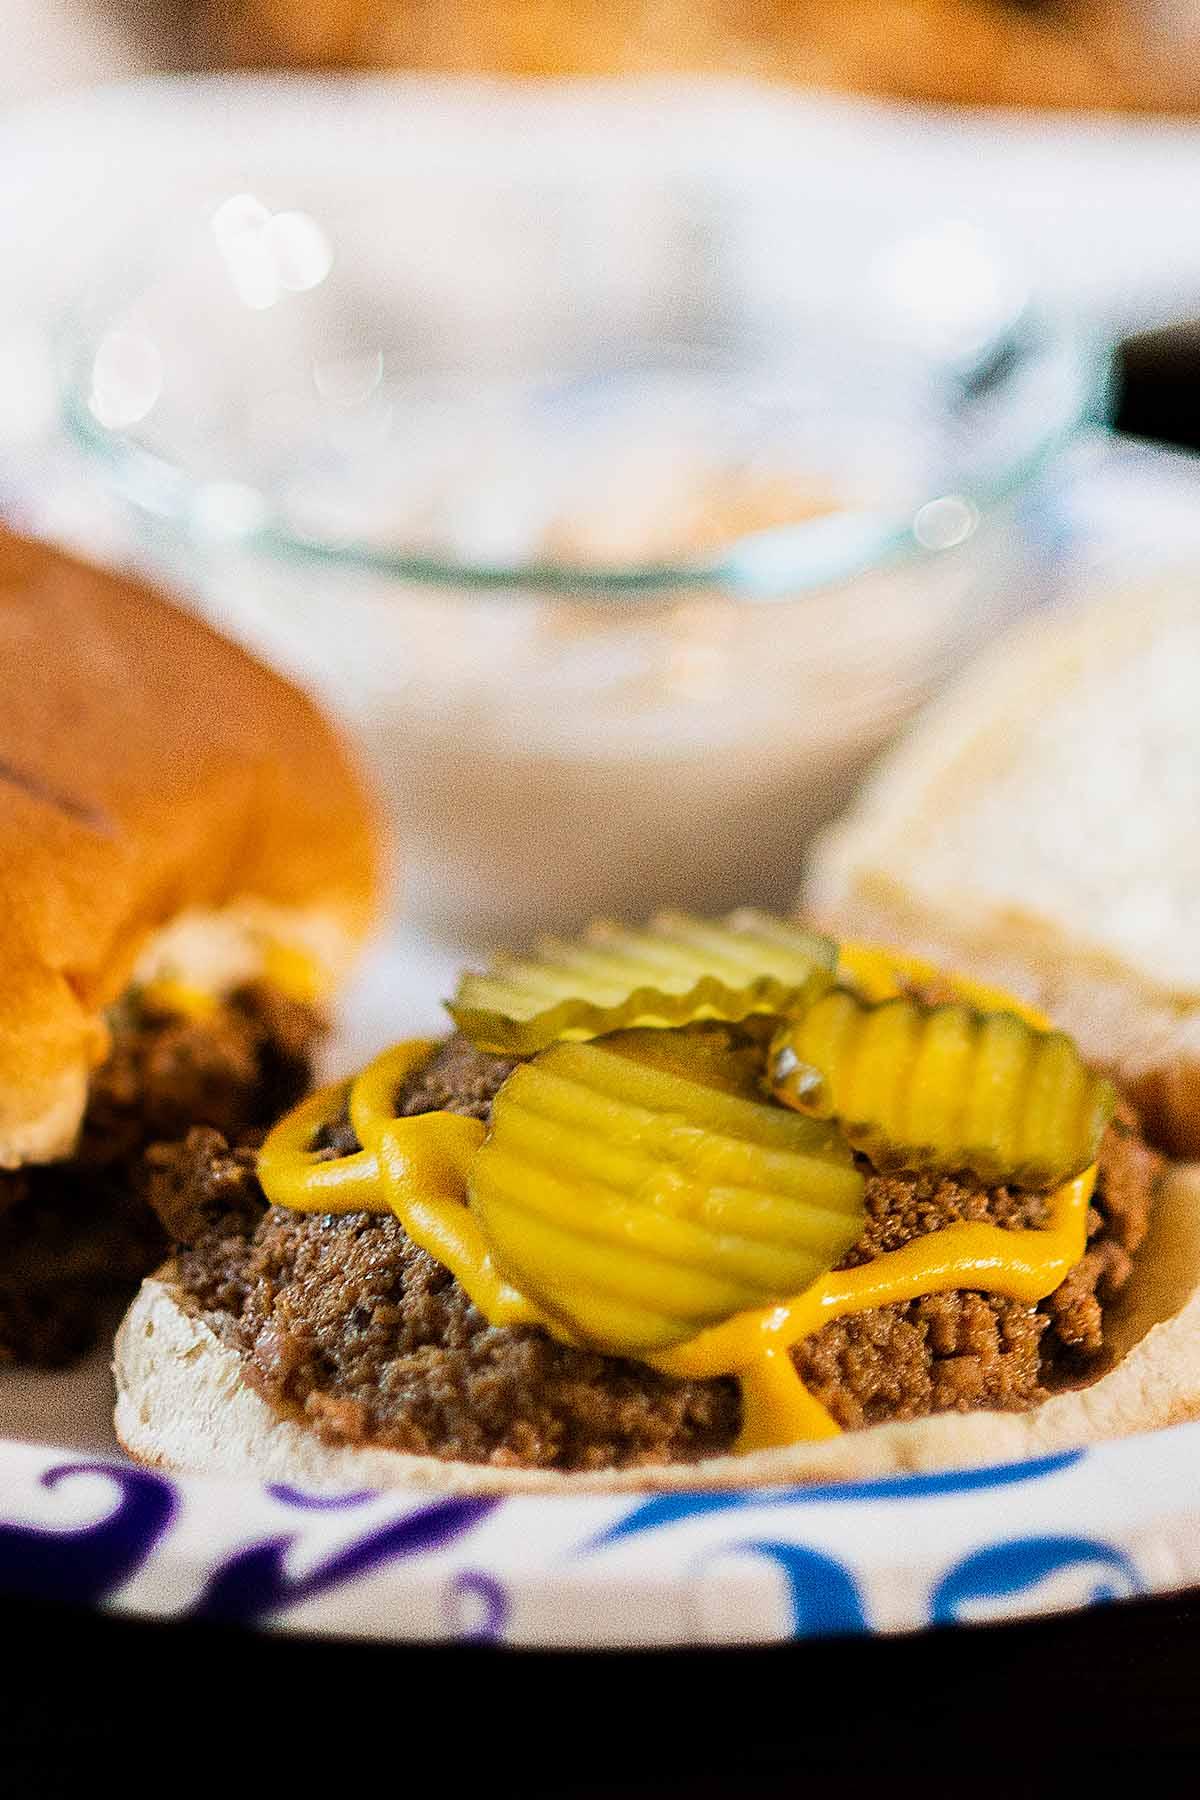 Tastee loose meat sandwich topped with pickles and mustard.